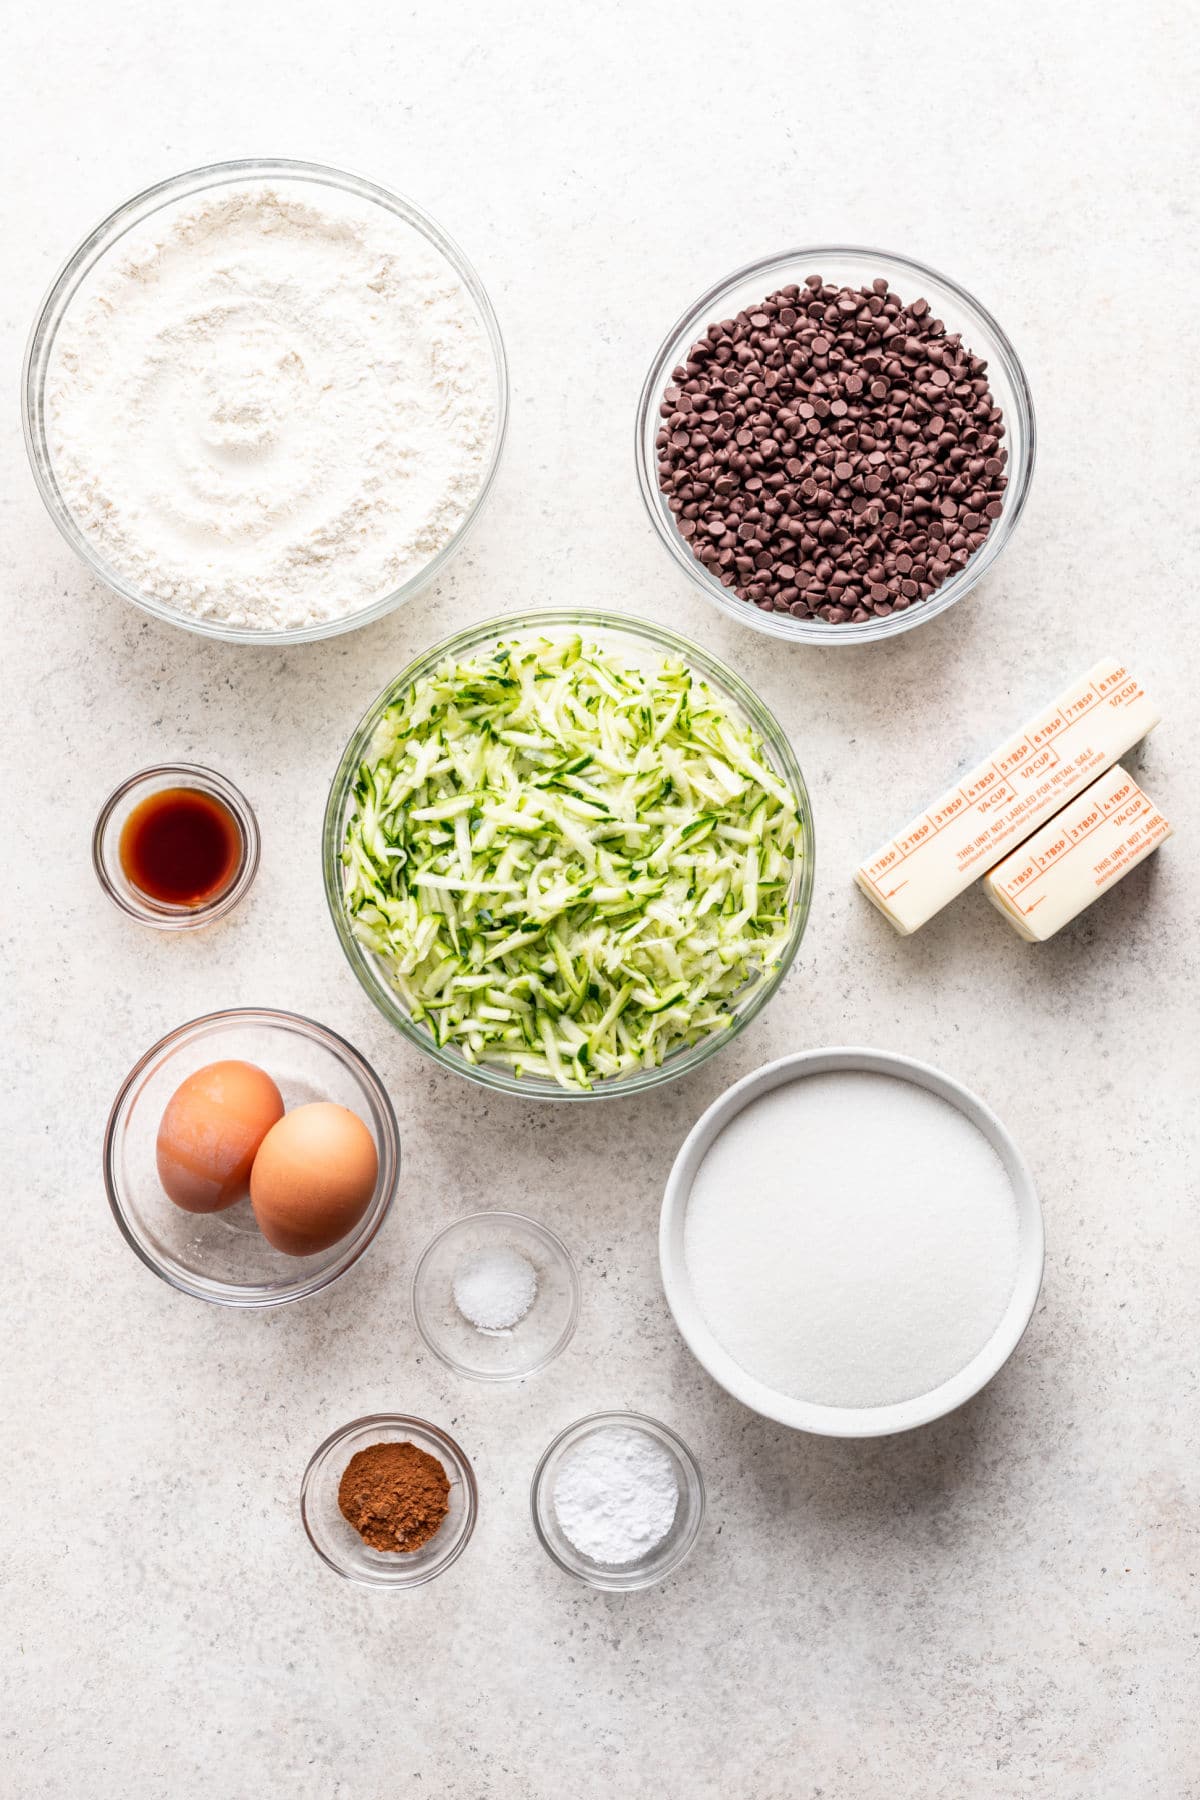 Ingredients for chocolate chip zucchini bread in dishes. 